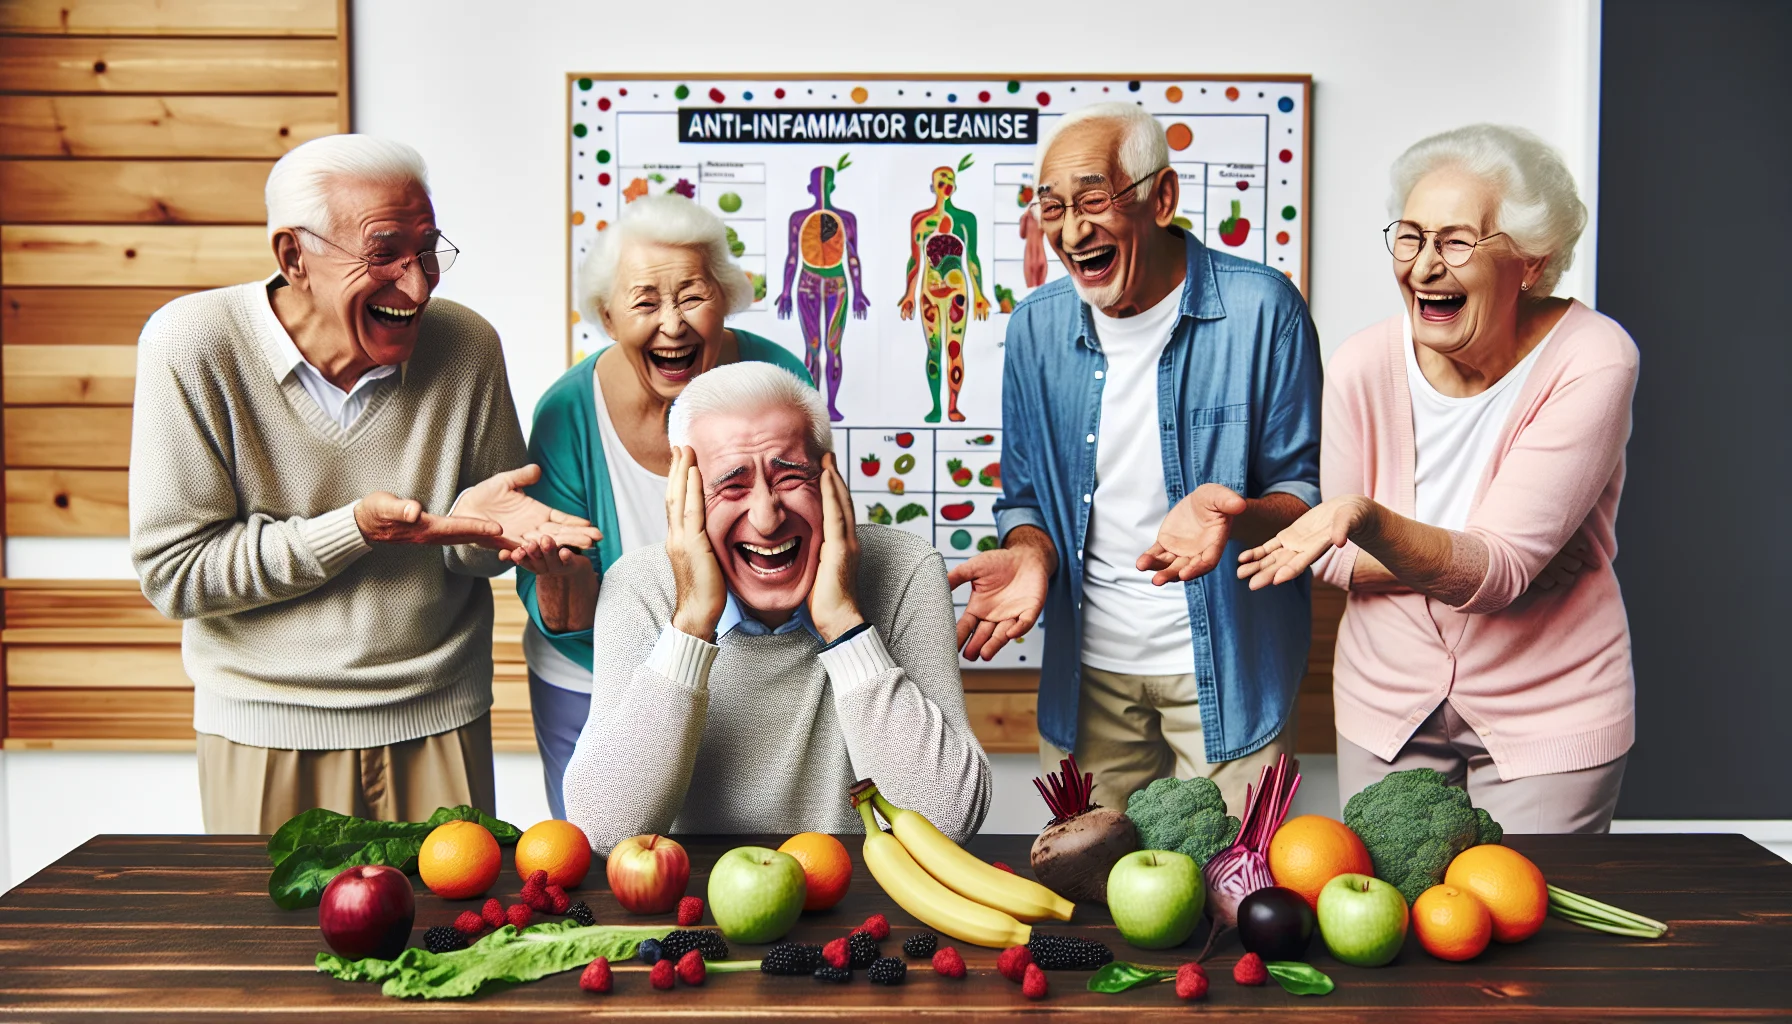 Create an entertaining and realistic image of an anti-inflammatory cleanse workshop being held at a retirement community. Show the diverse group of elderly participants, including a Caucasian male, a Hispanic female, a Black female, and Middle-Eastern male, all in high spirits and sharing a laugh together. They are surrounded by colourful fresh fruits, vegetables, and vividly illustrated diet charts. One of them is jokingly struggling to identify a vegetable, perhaps a beetroot, while others laugh and assist.